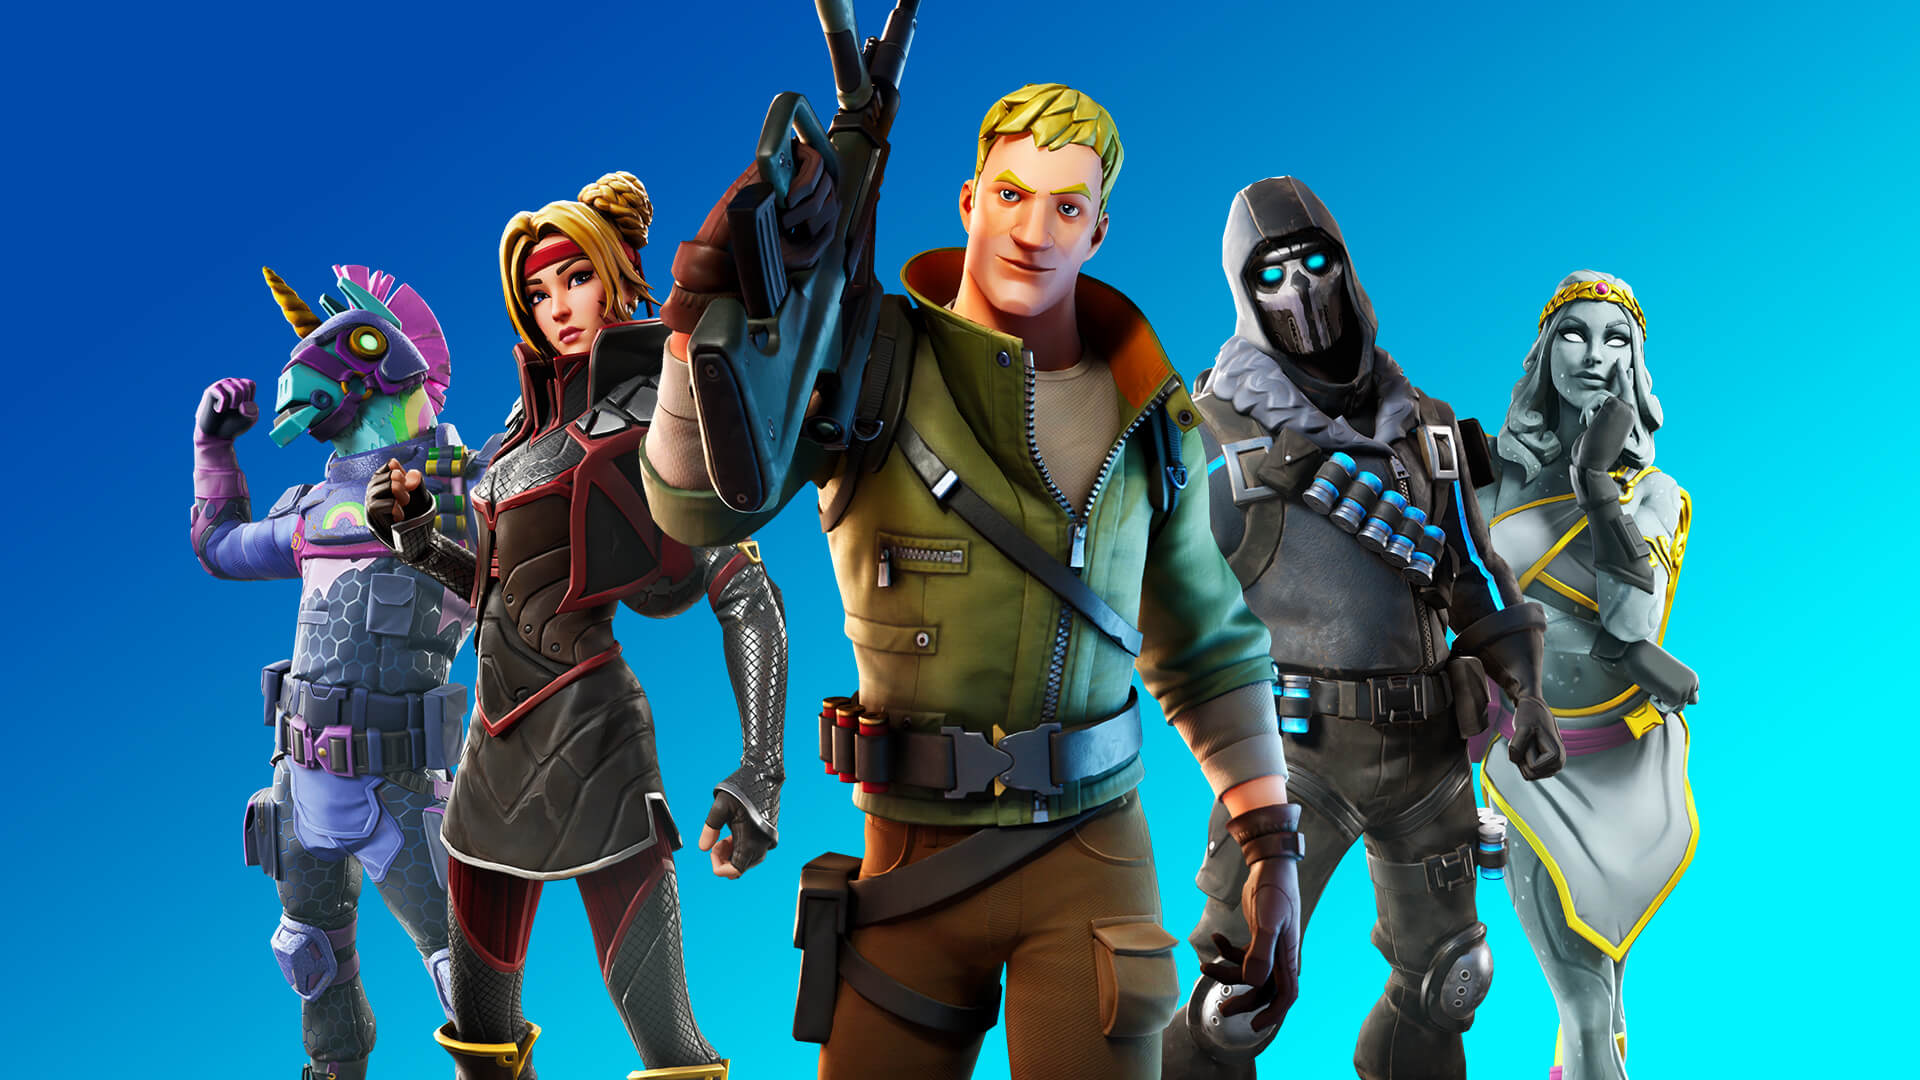 Image for Epic says Superdata's reports of Fortnite's revenue are "wildly inaccurate"